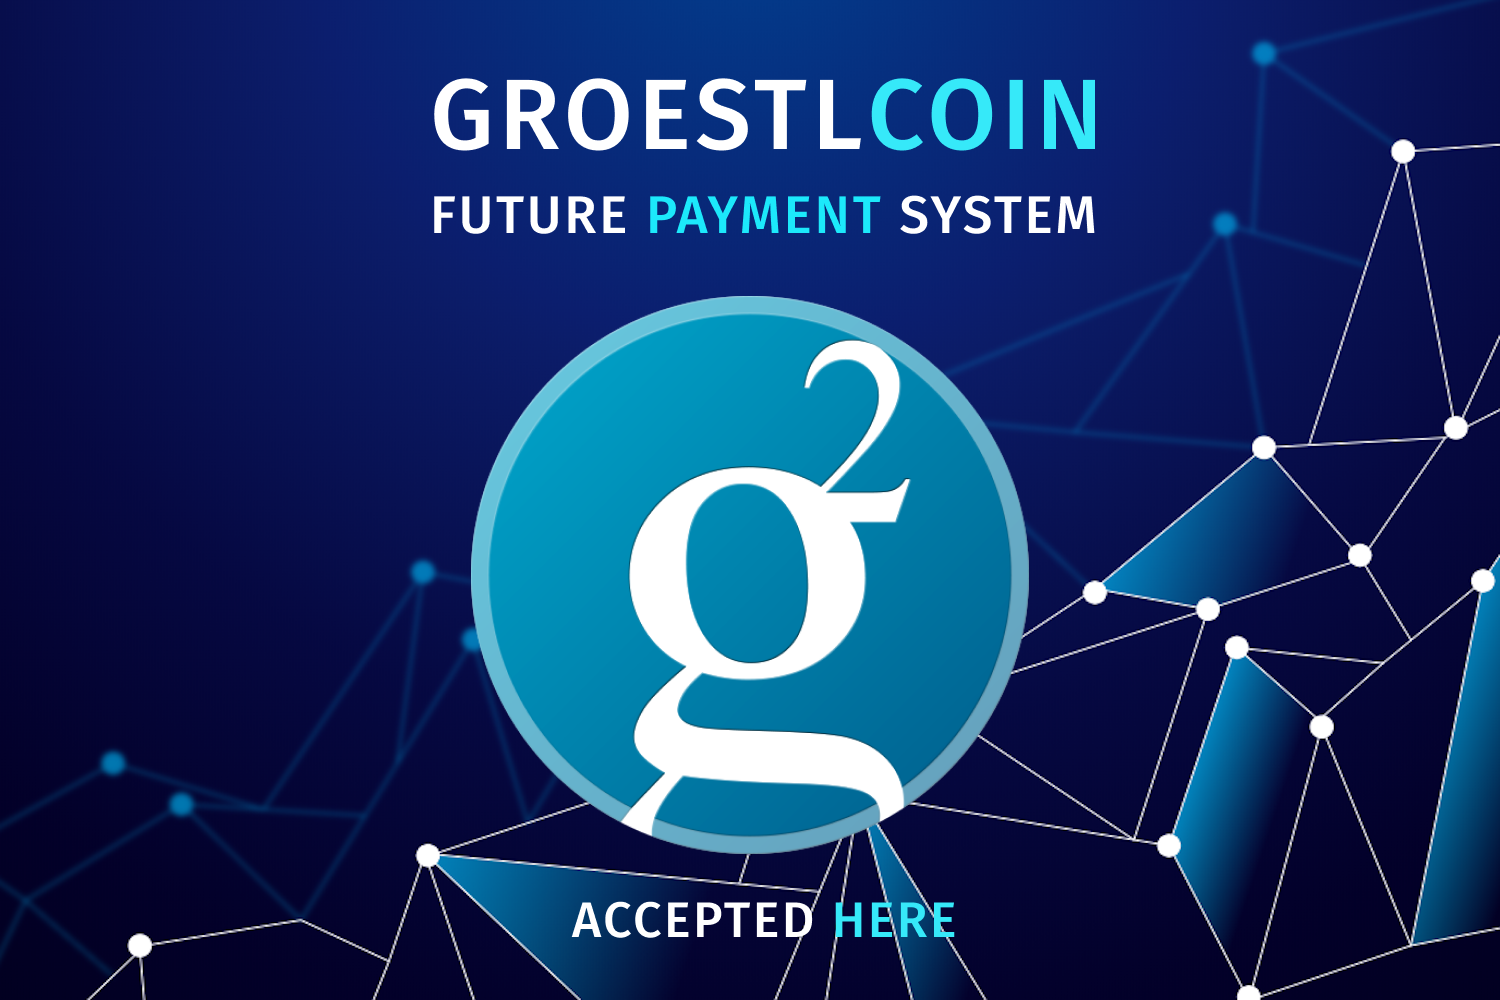 Groestlcoin accepted here